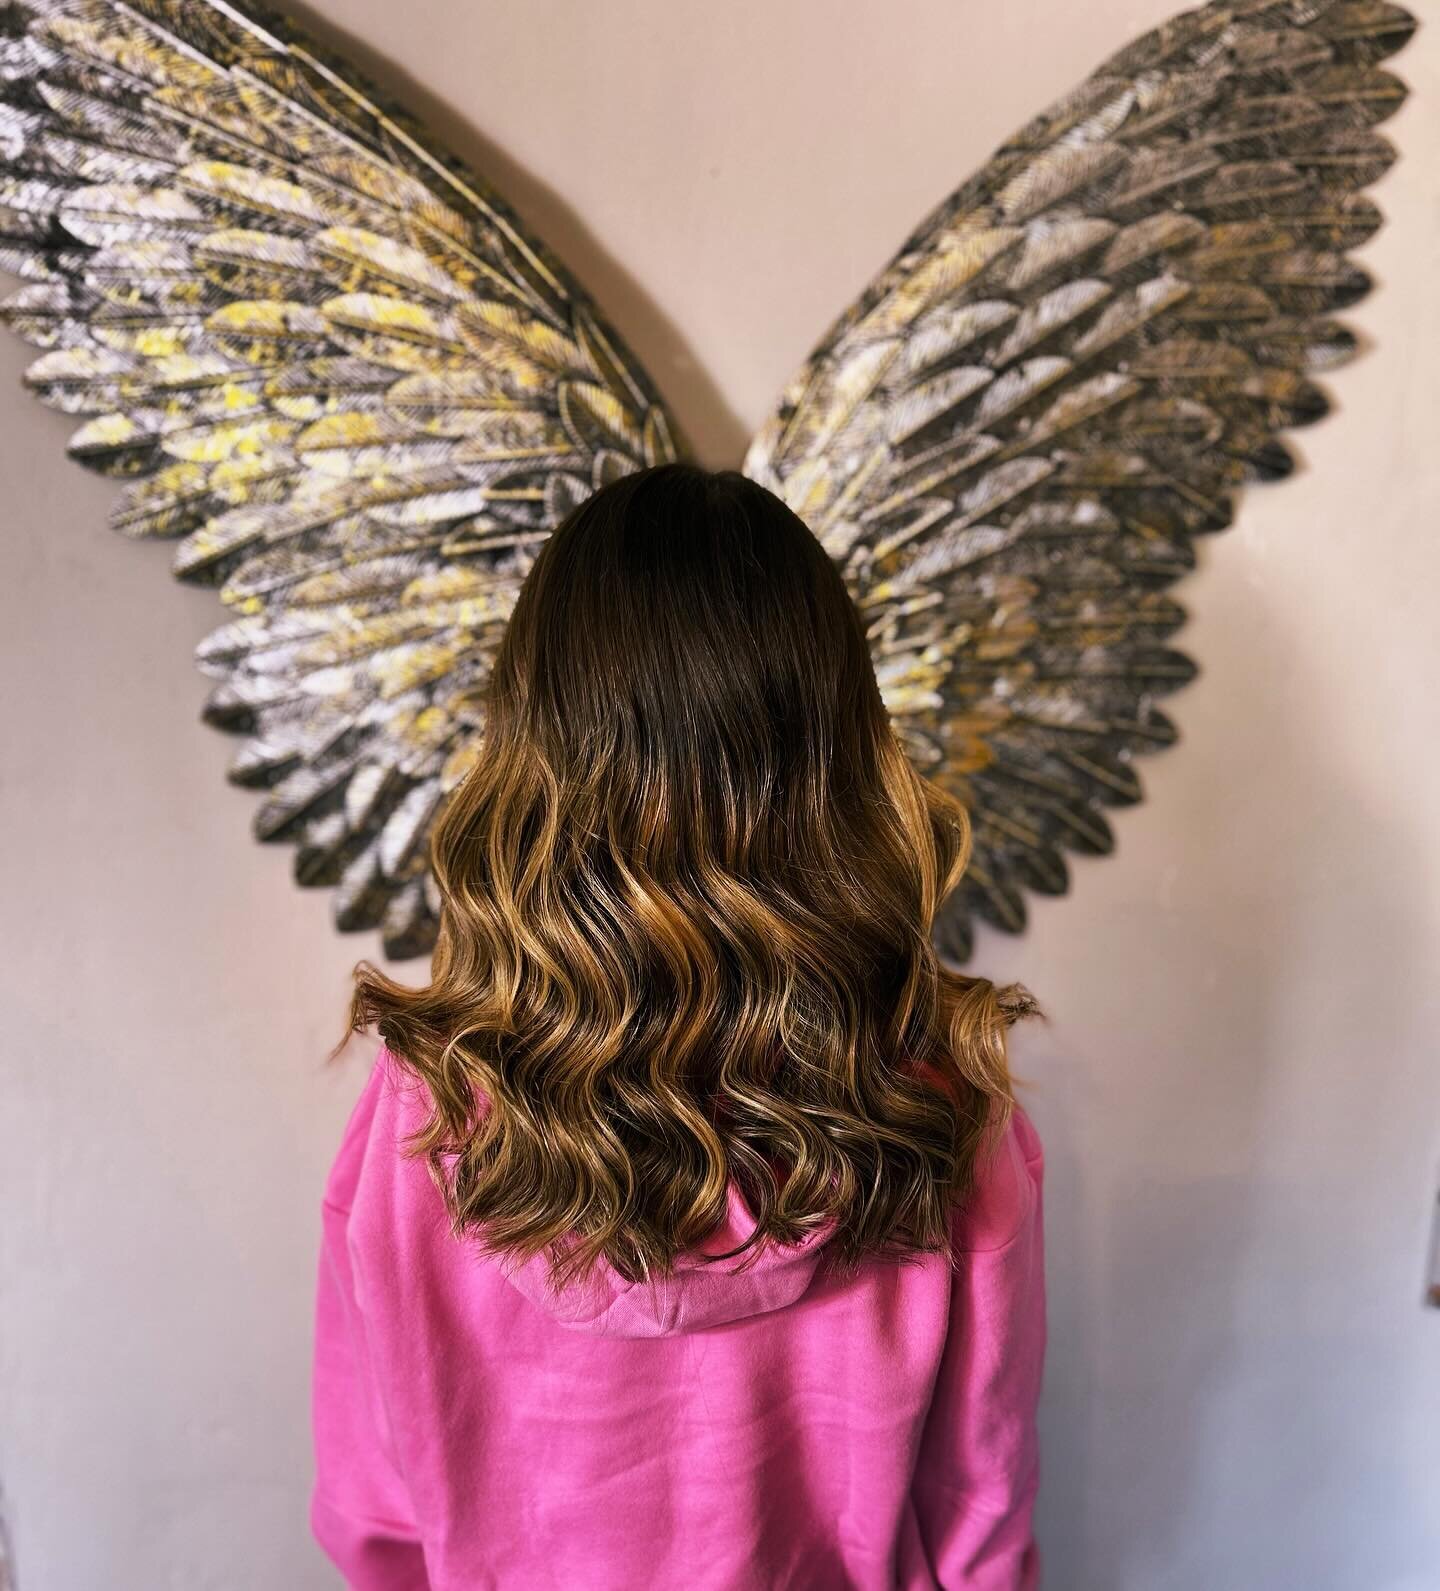 Party waves for the little Prinny 🥳🎉

@cloudninehair waves
@salonhaireveryday mirror mirror shine 

#hair#curl#waves#hairdresser #hairoftheday